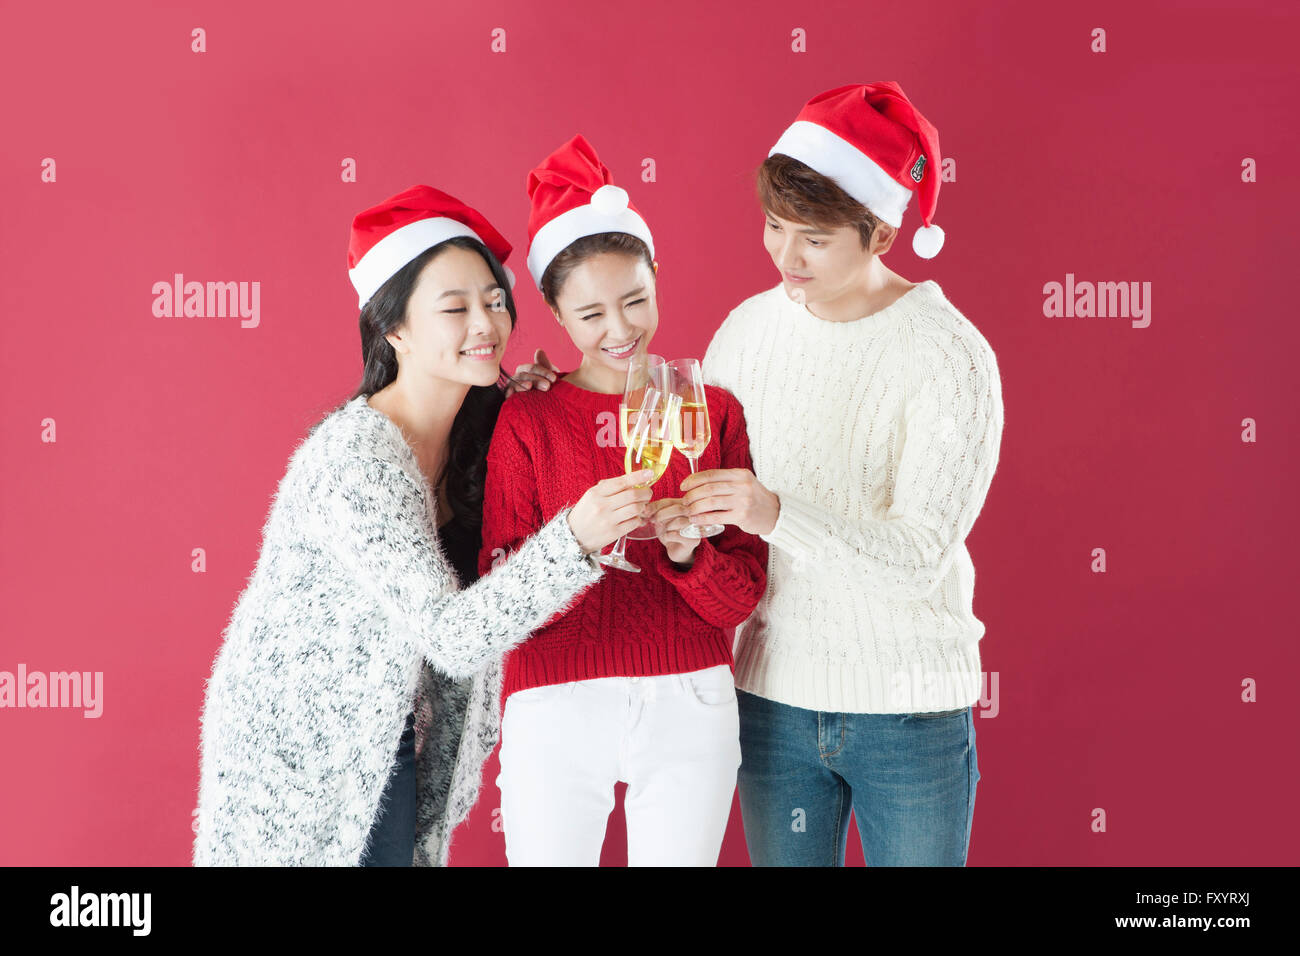 Portrait of young smiling people toasting at Christmas party Banque D'Images